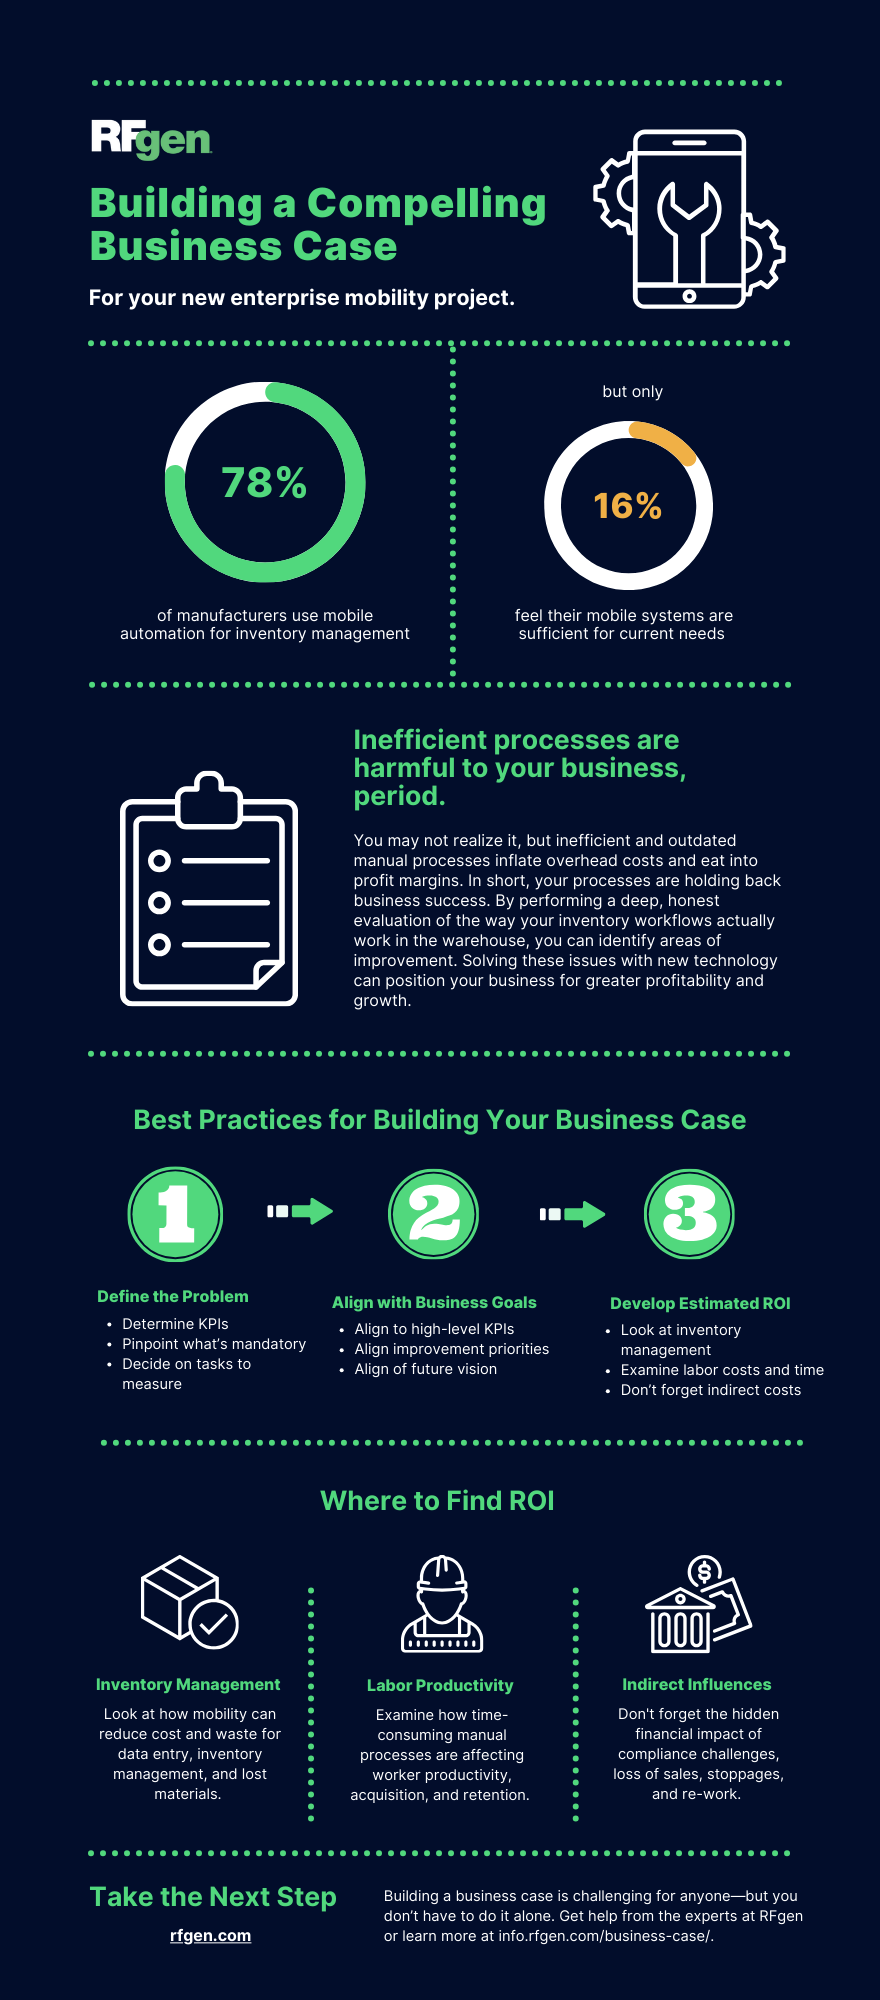 RFgen infographic illustrating the key components of building a winning business case for new mobile technology project.